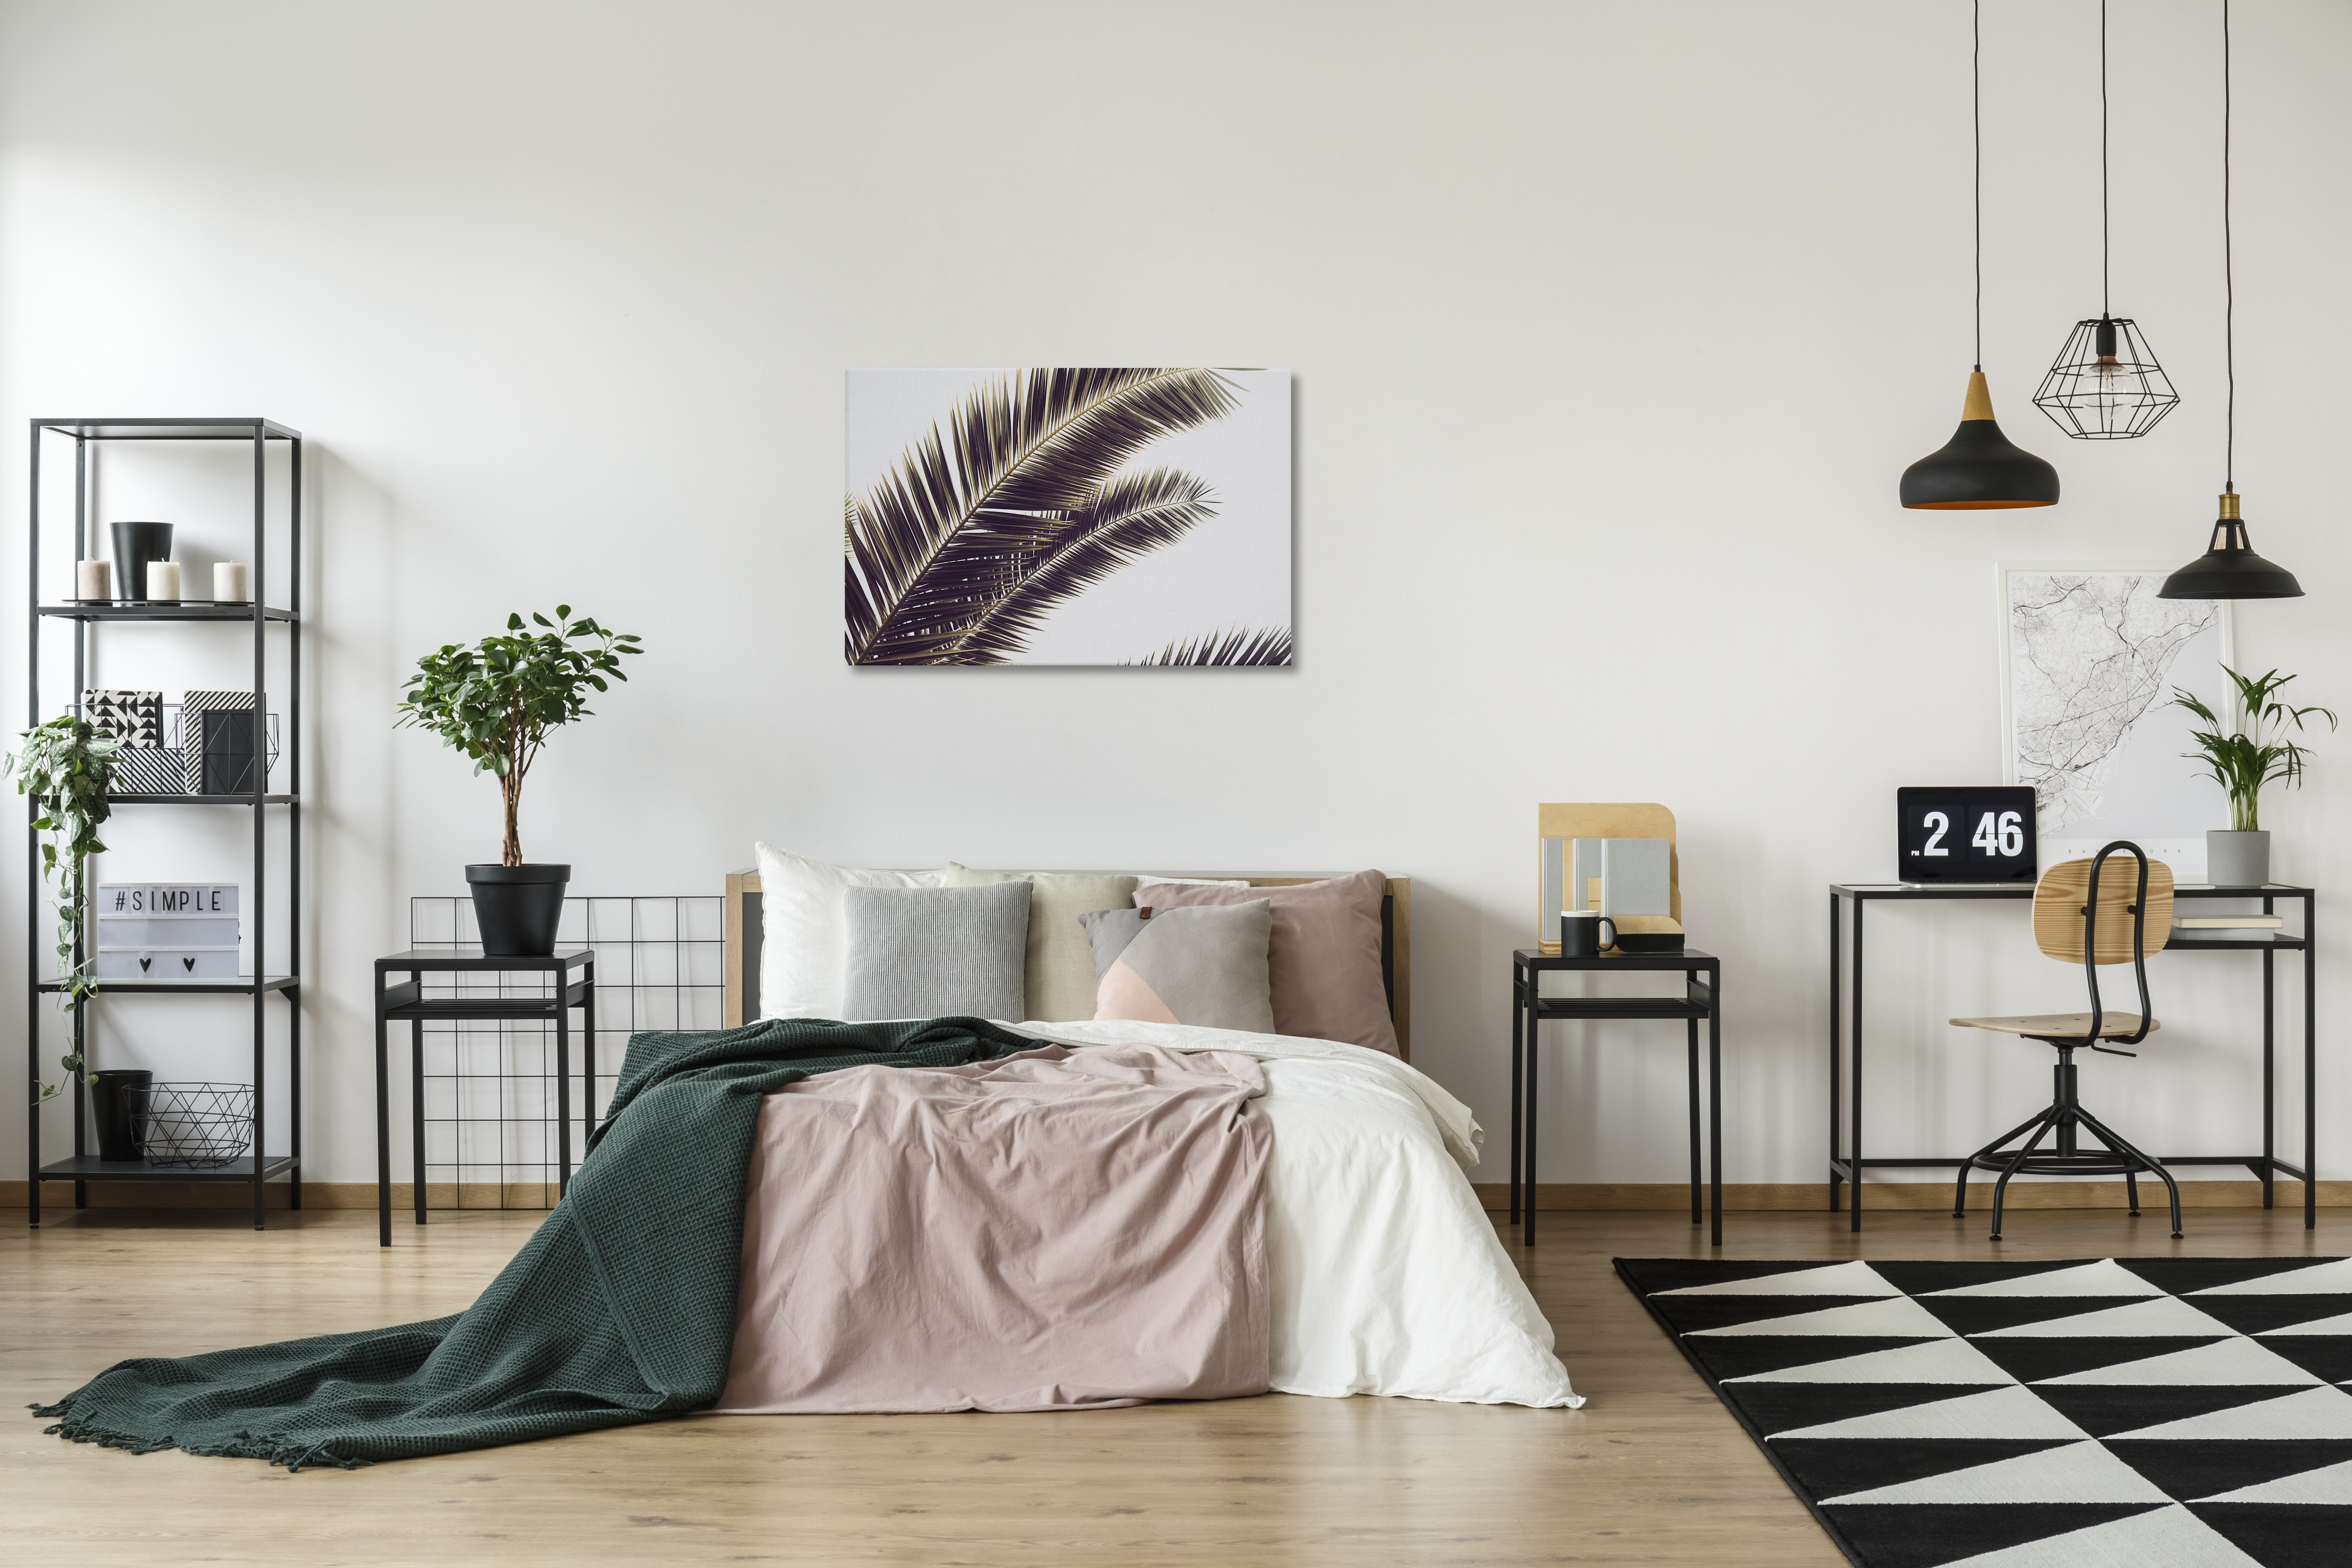 Canvas print of abstract wall art above bed